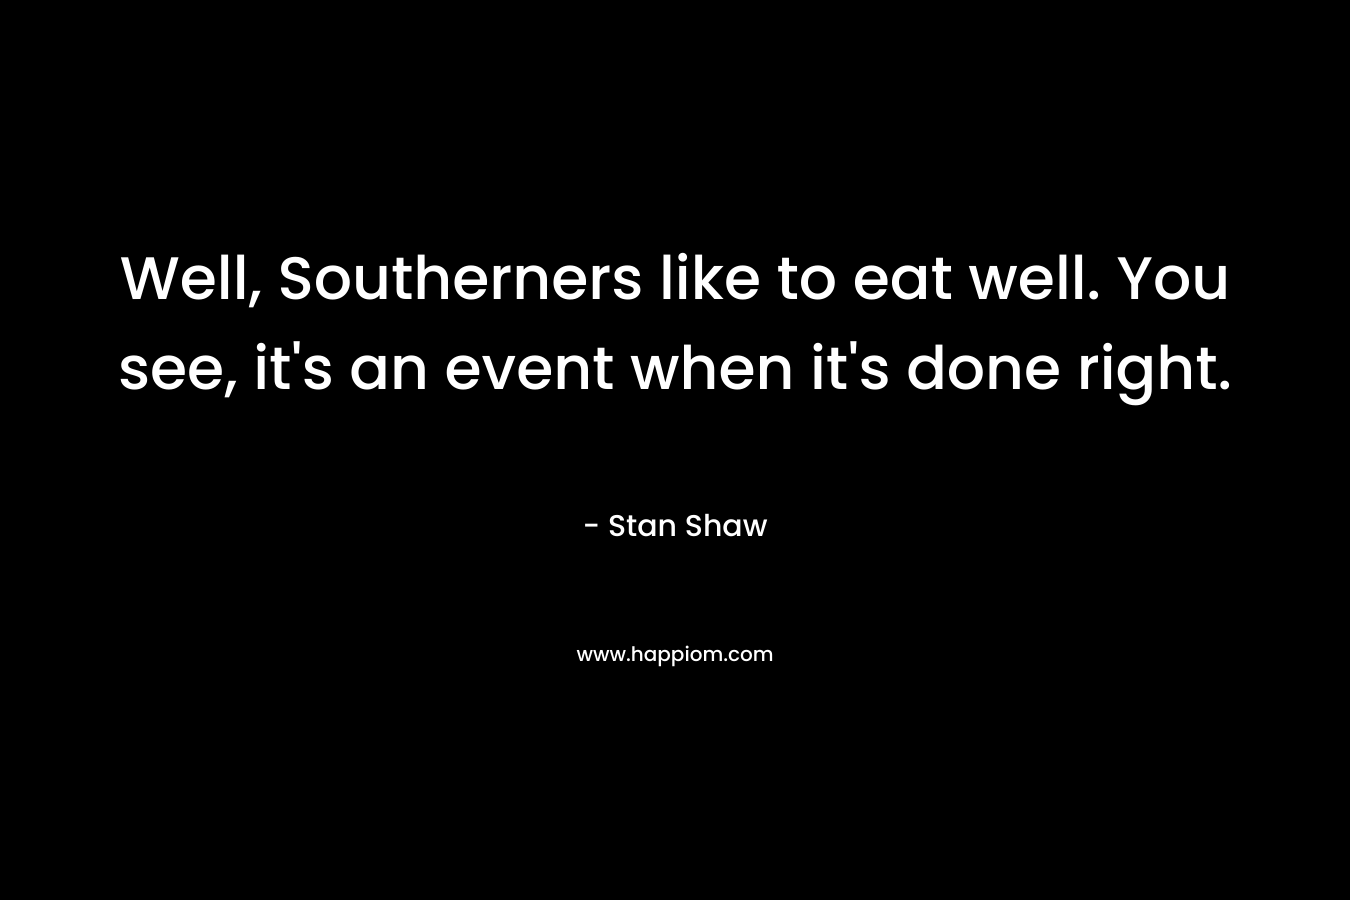 Well, Southerners like to eat well. You see, it's an event when it's done right.